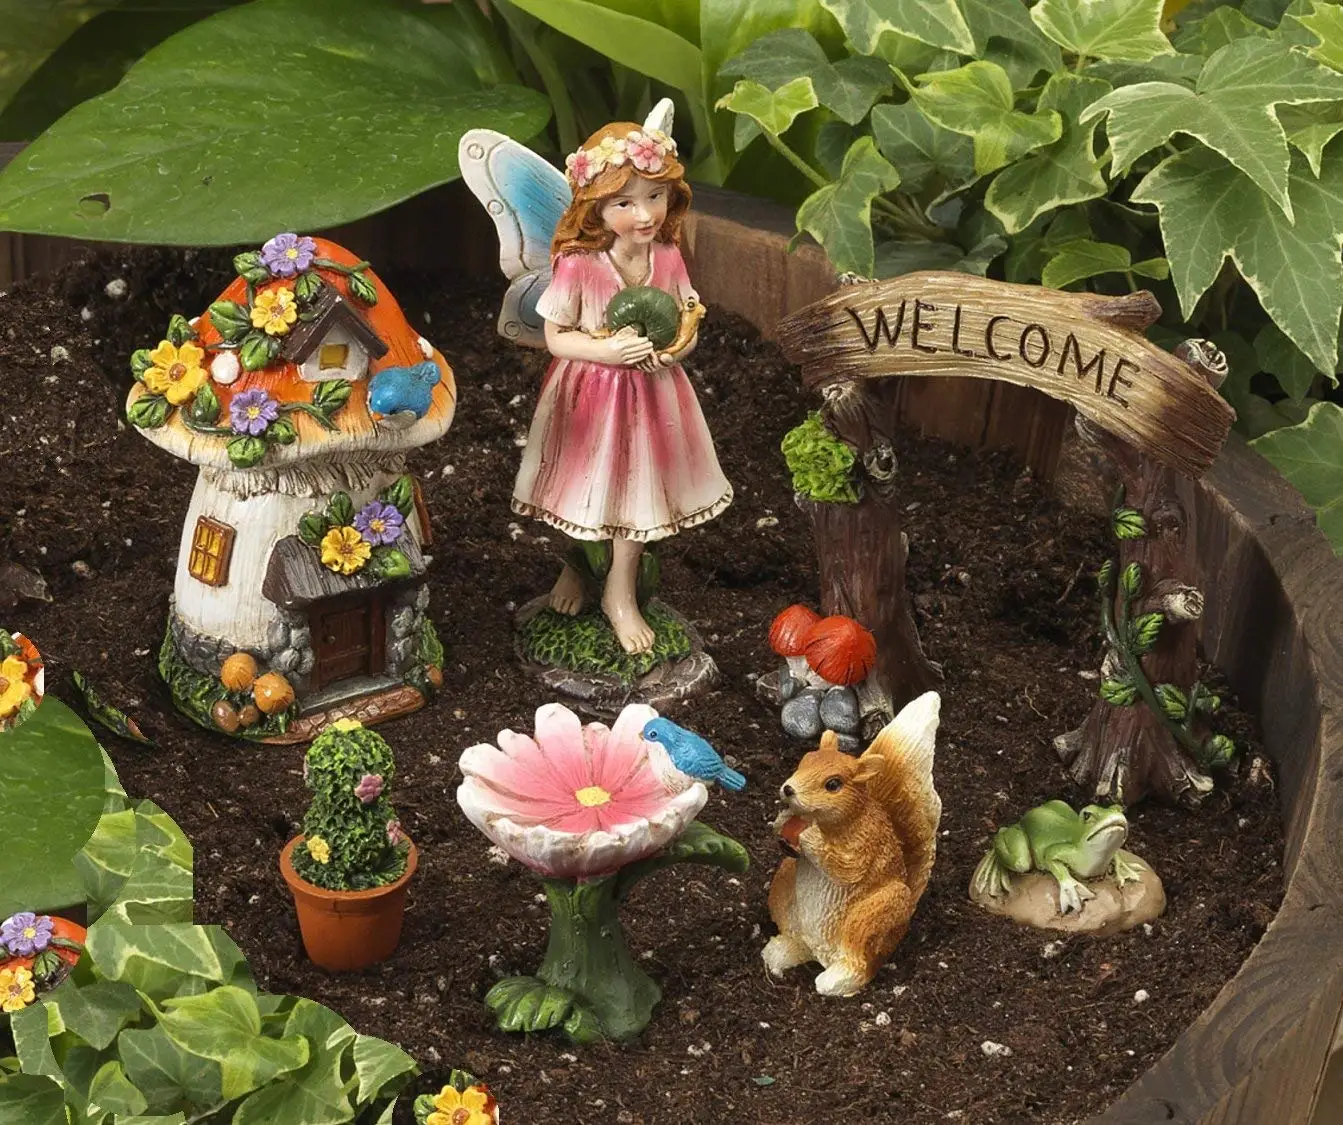 Cheap Fairy Figurines, find Fairy Figurines deals on line at Alibaba.com